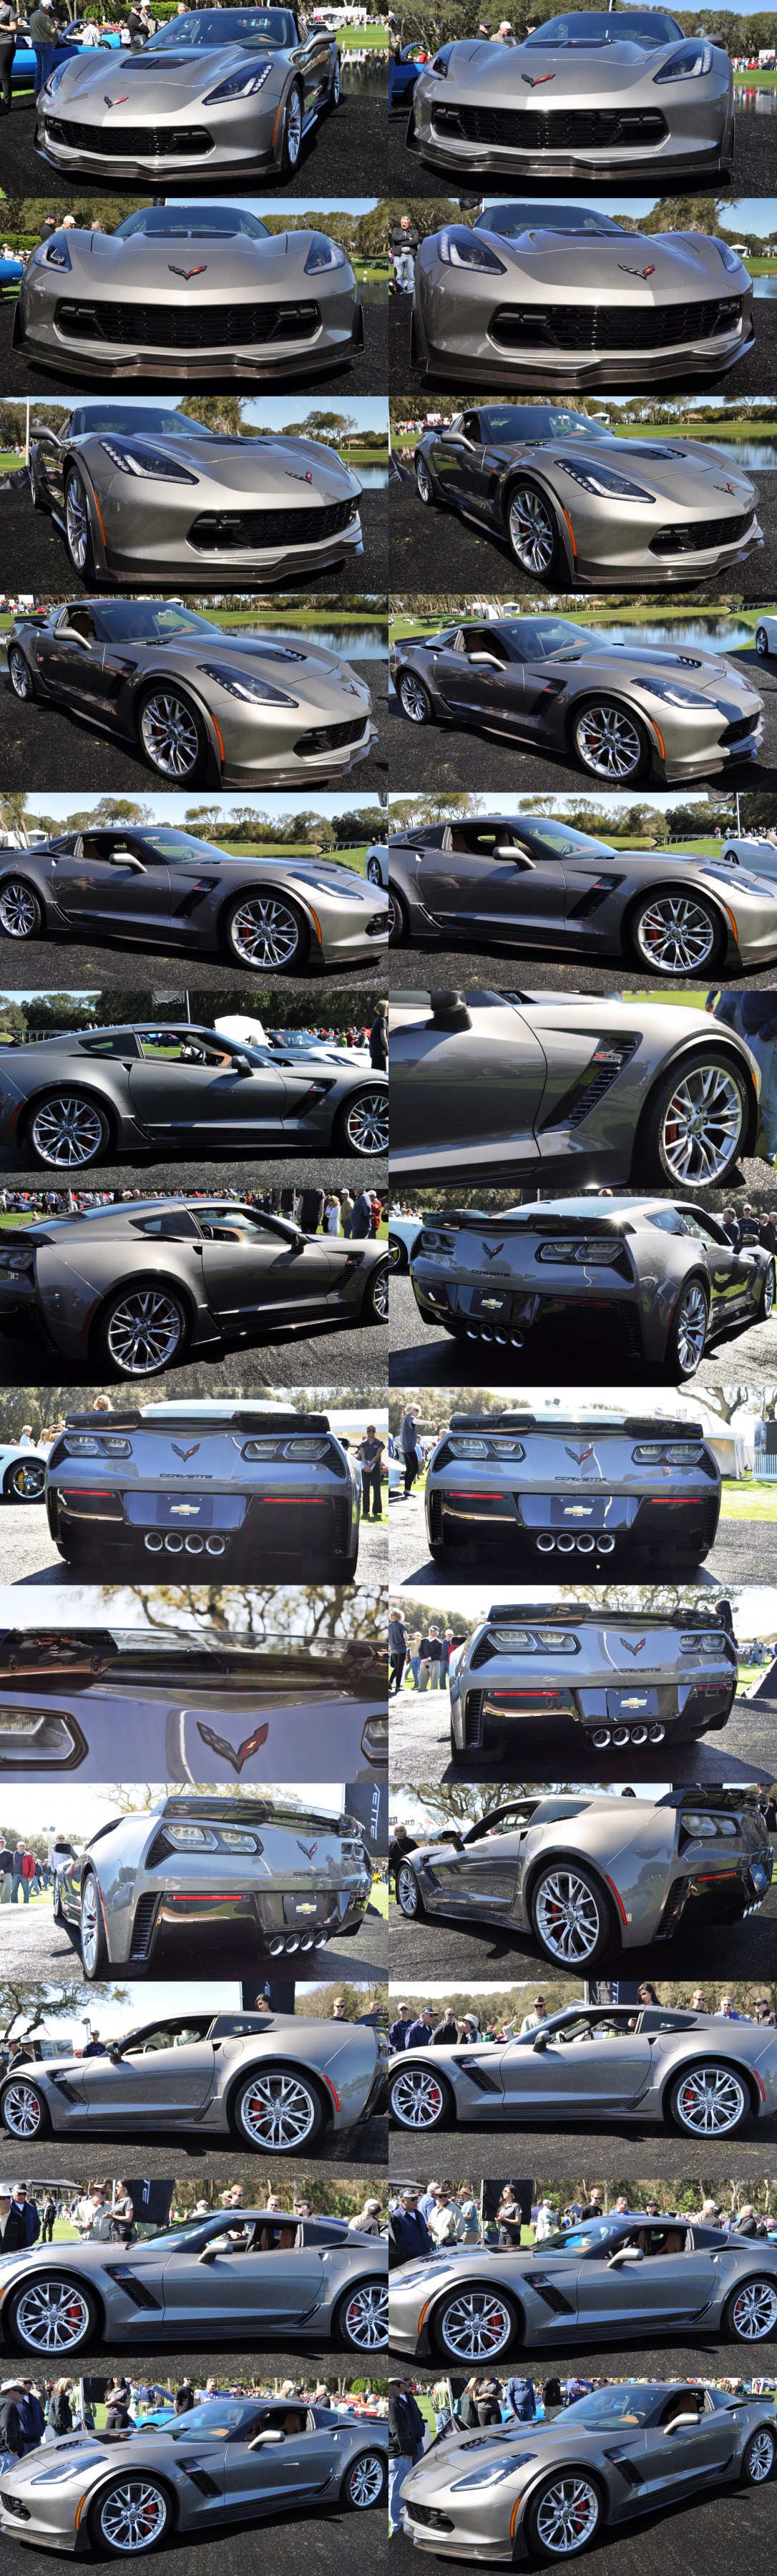 2015 Z06 -- First Outdoor Showing -- Forthcoming Chevrolet Corvette Track Monster Holds Still For 26 High-Res Photos 1-tile